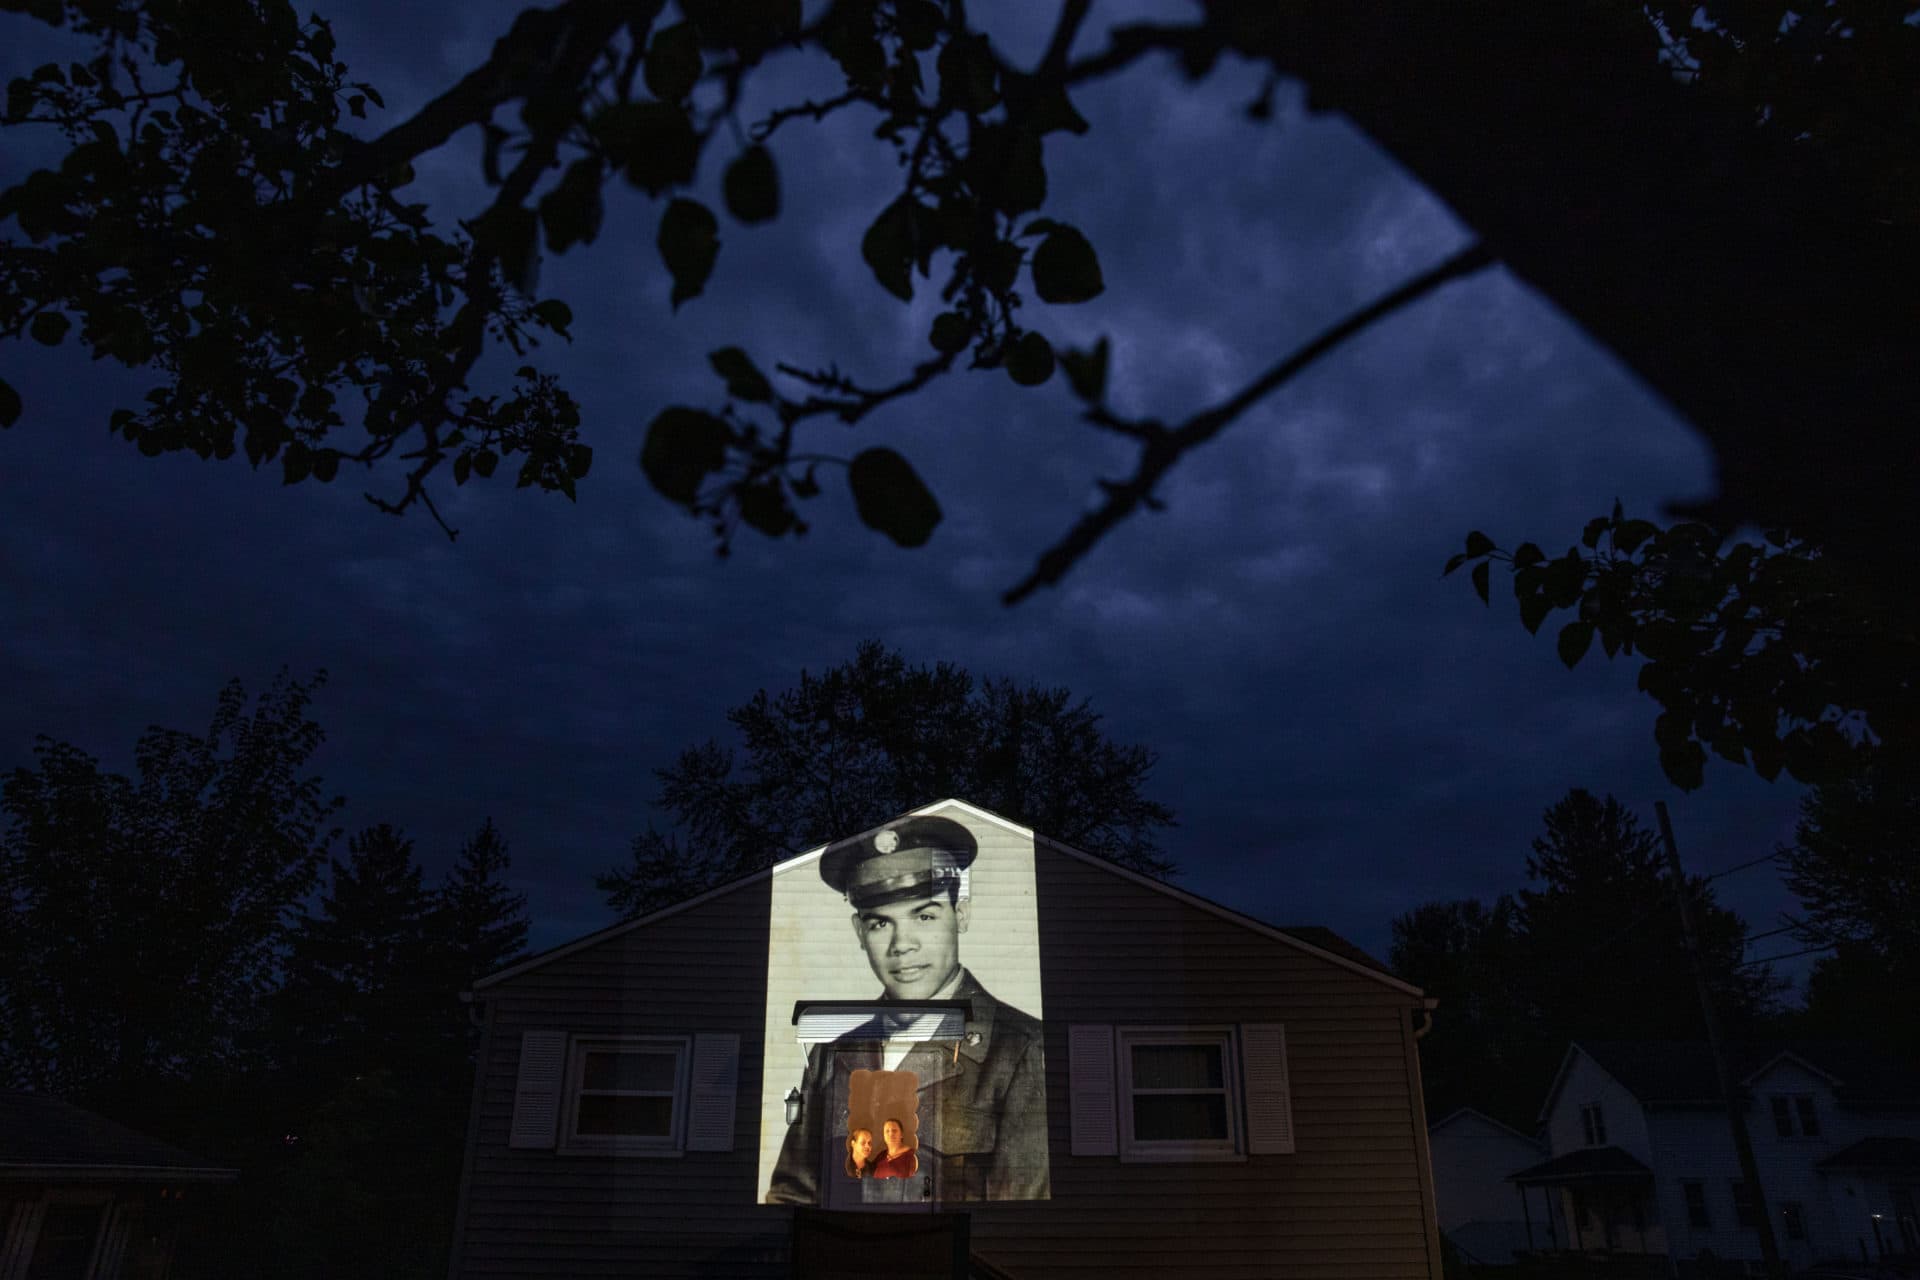 An image of veteran Samuel Melendez is projected onto the home of his nieces, Janet Ramirez, right, and Mary Perez, as they look out a doorway in Chicopee, Mass. (David Goldman/AP)